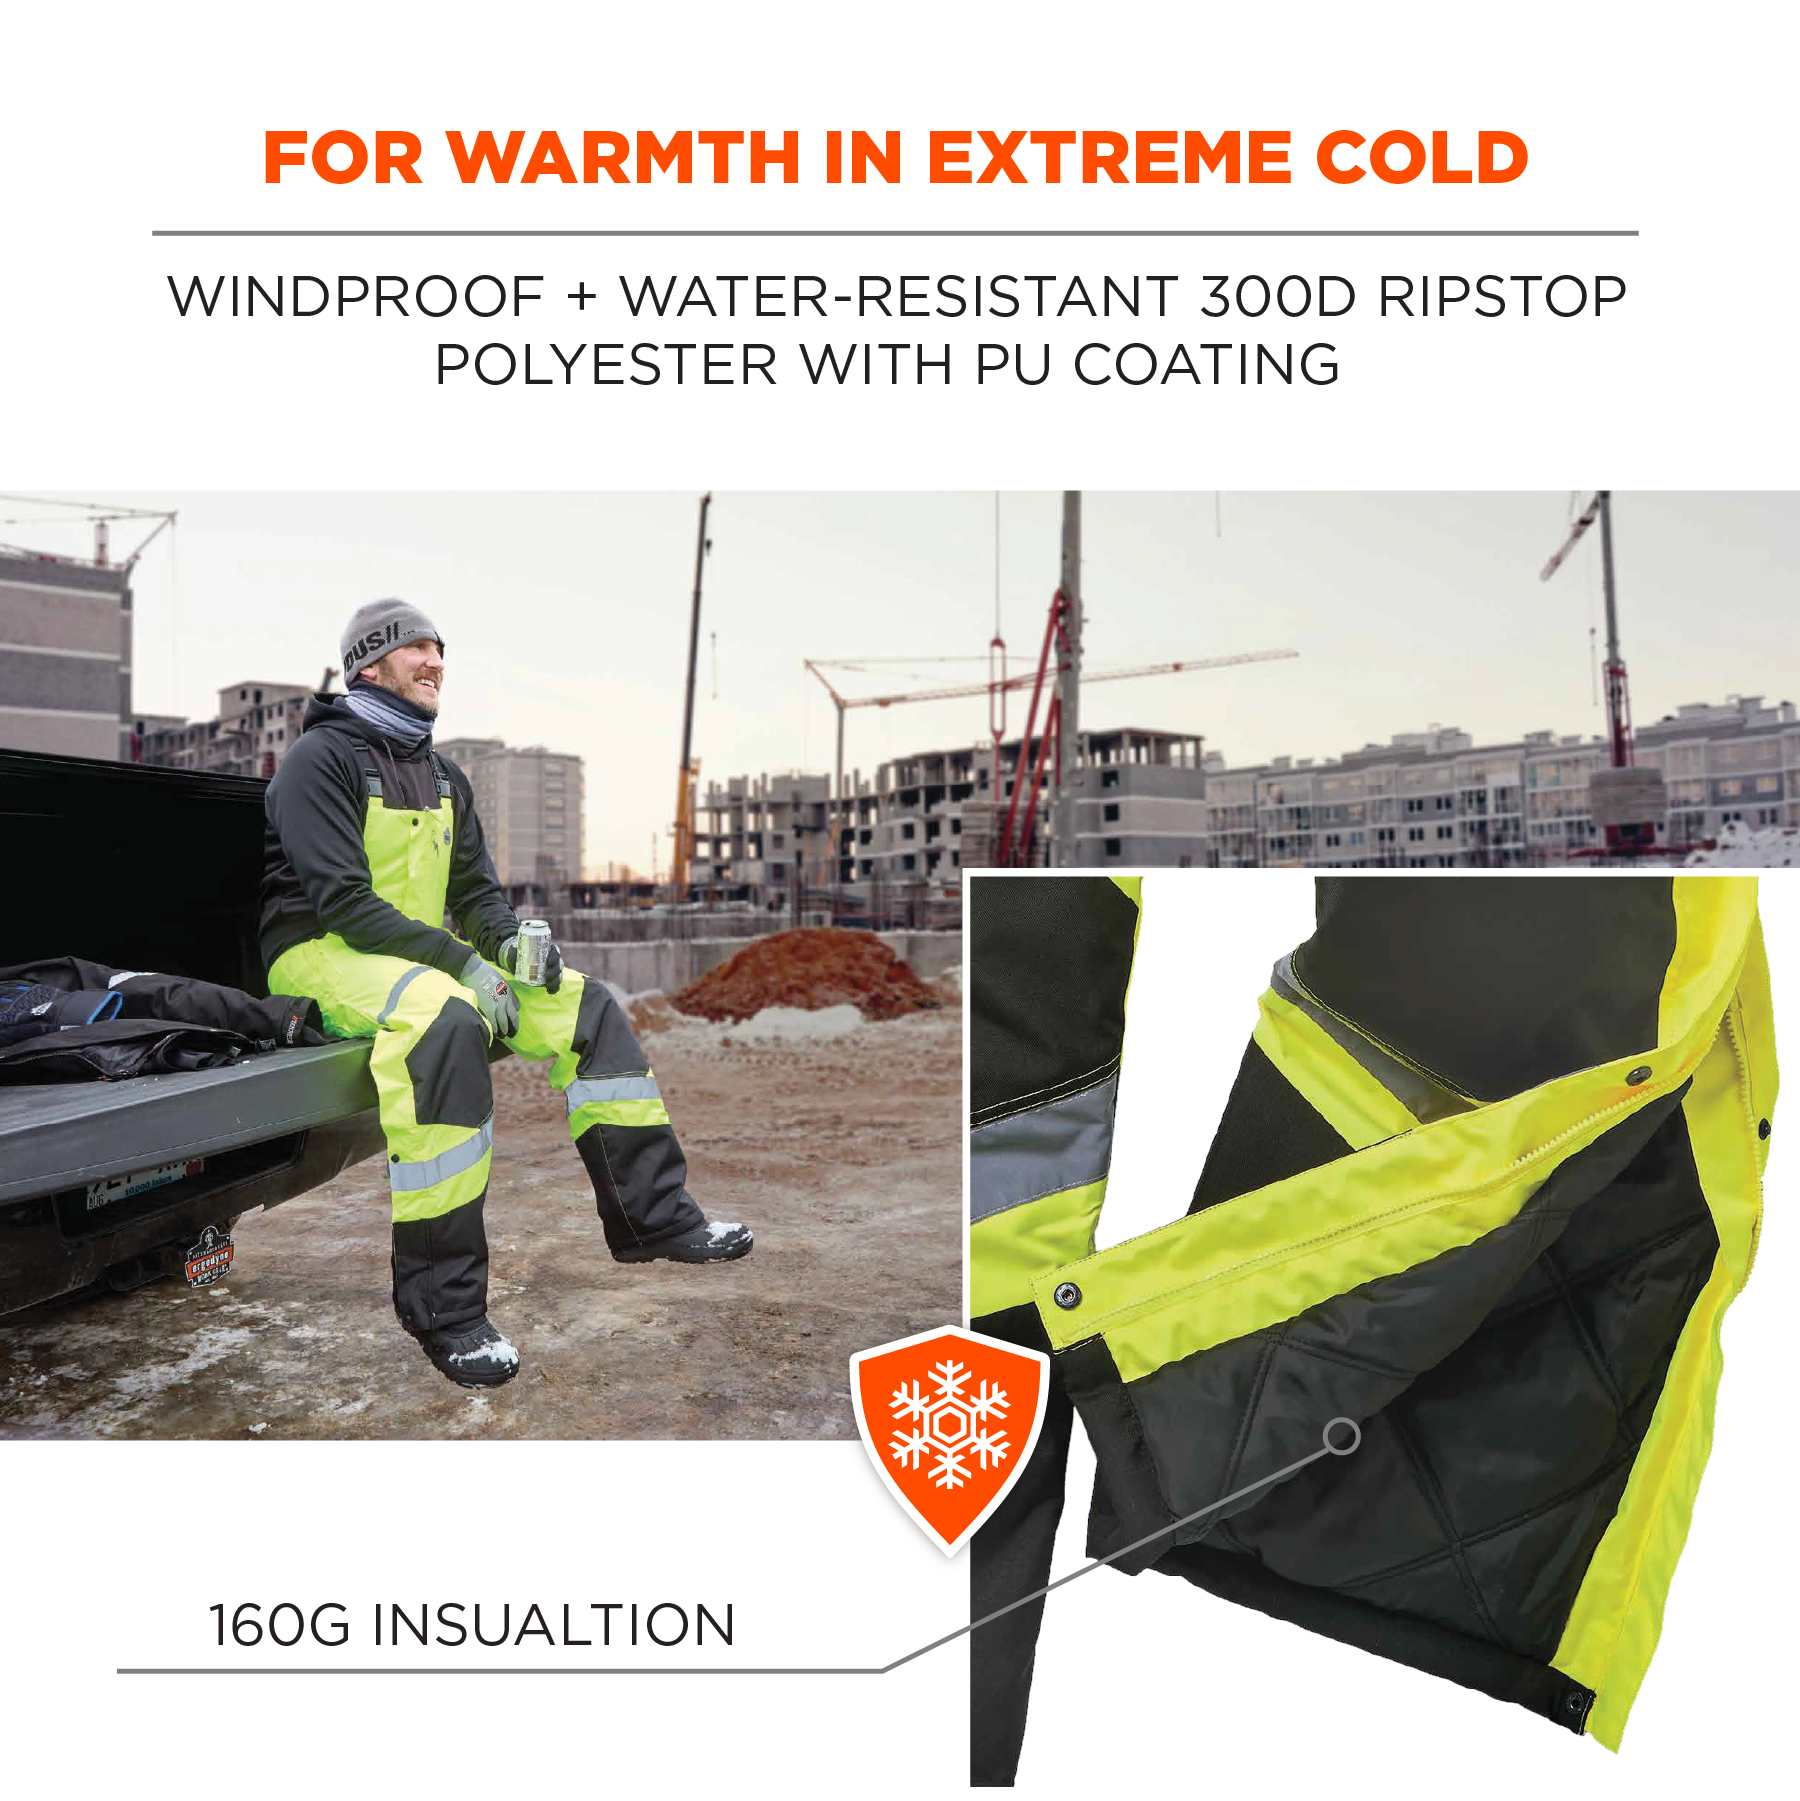 Reinforced Nylon Rip-Stop 3M Scotchlite Waterproof Size: Large Quilted Insulation Yellow/Black Majestic 75-2357 ANSI Class E Hi-Viz Bib Overalls Zippers at Ankle 